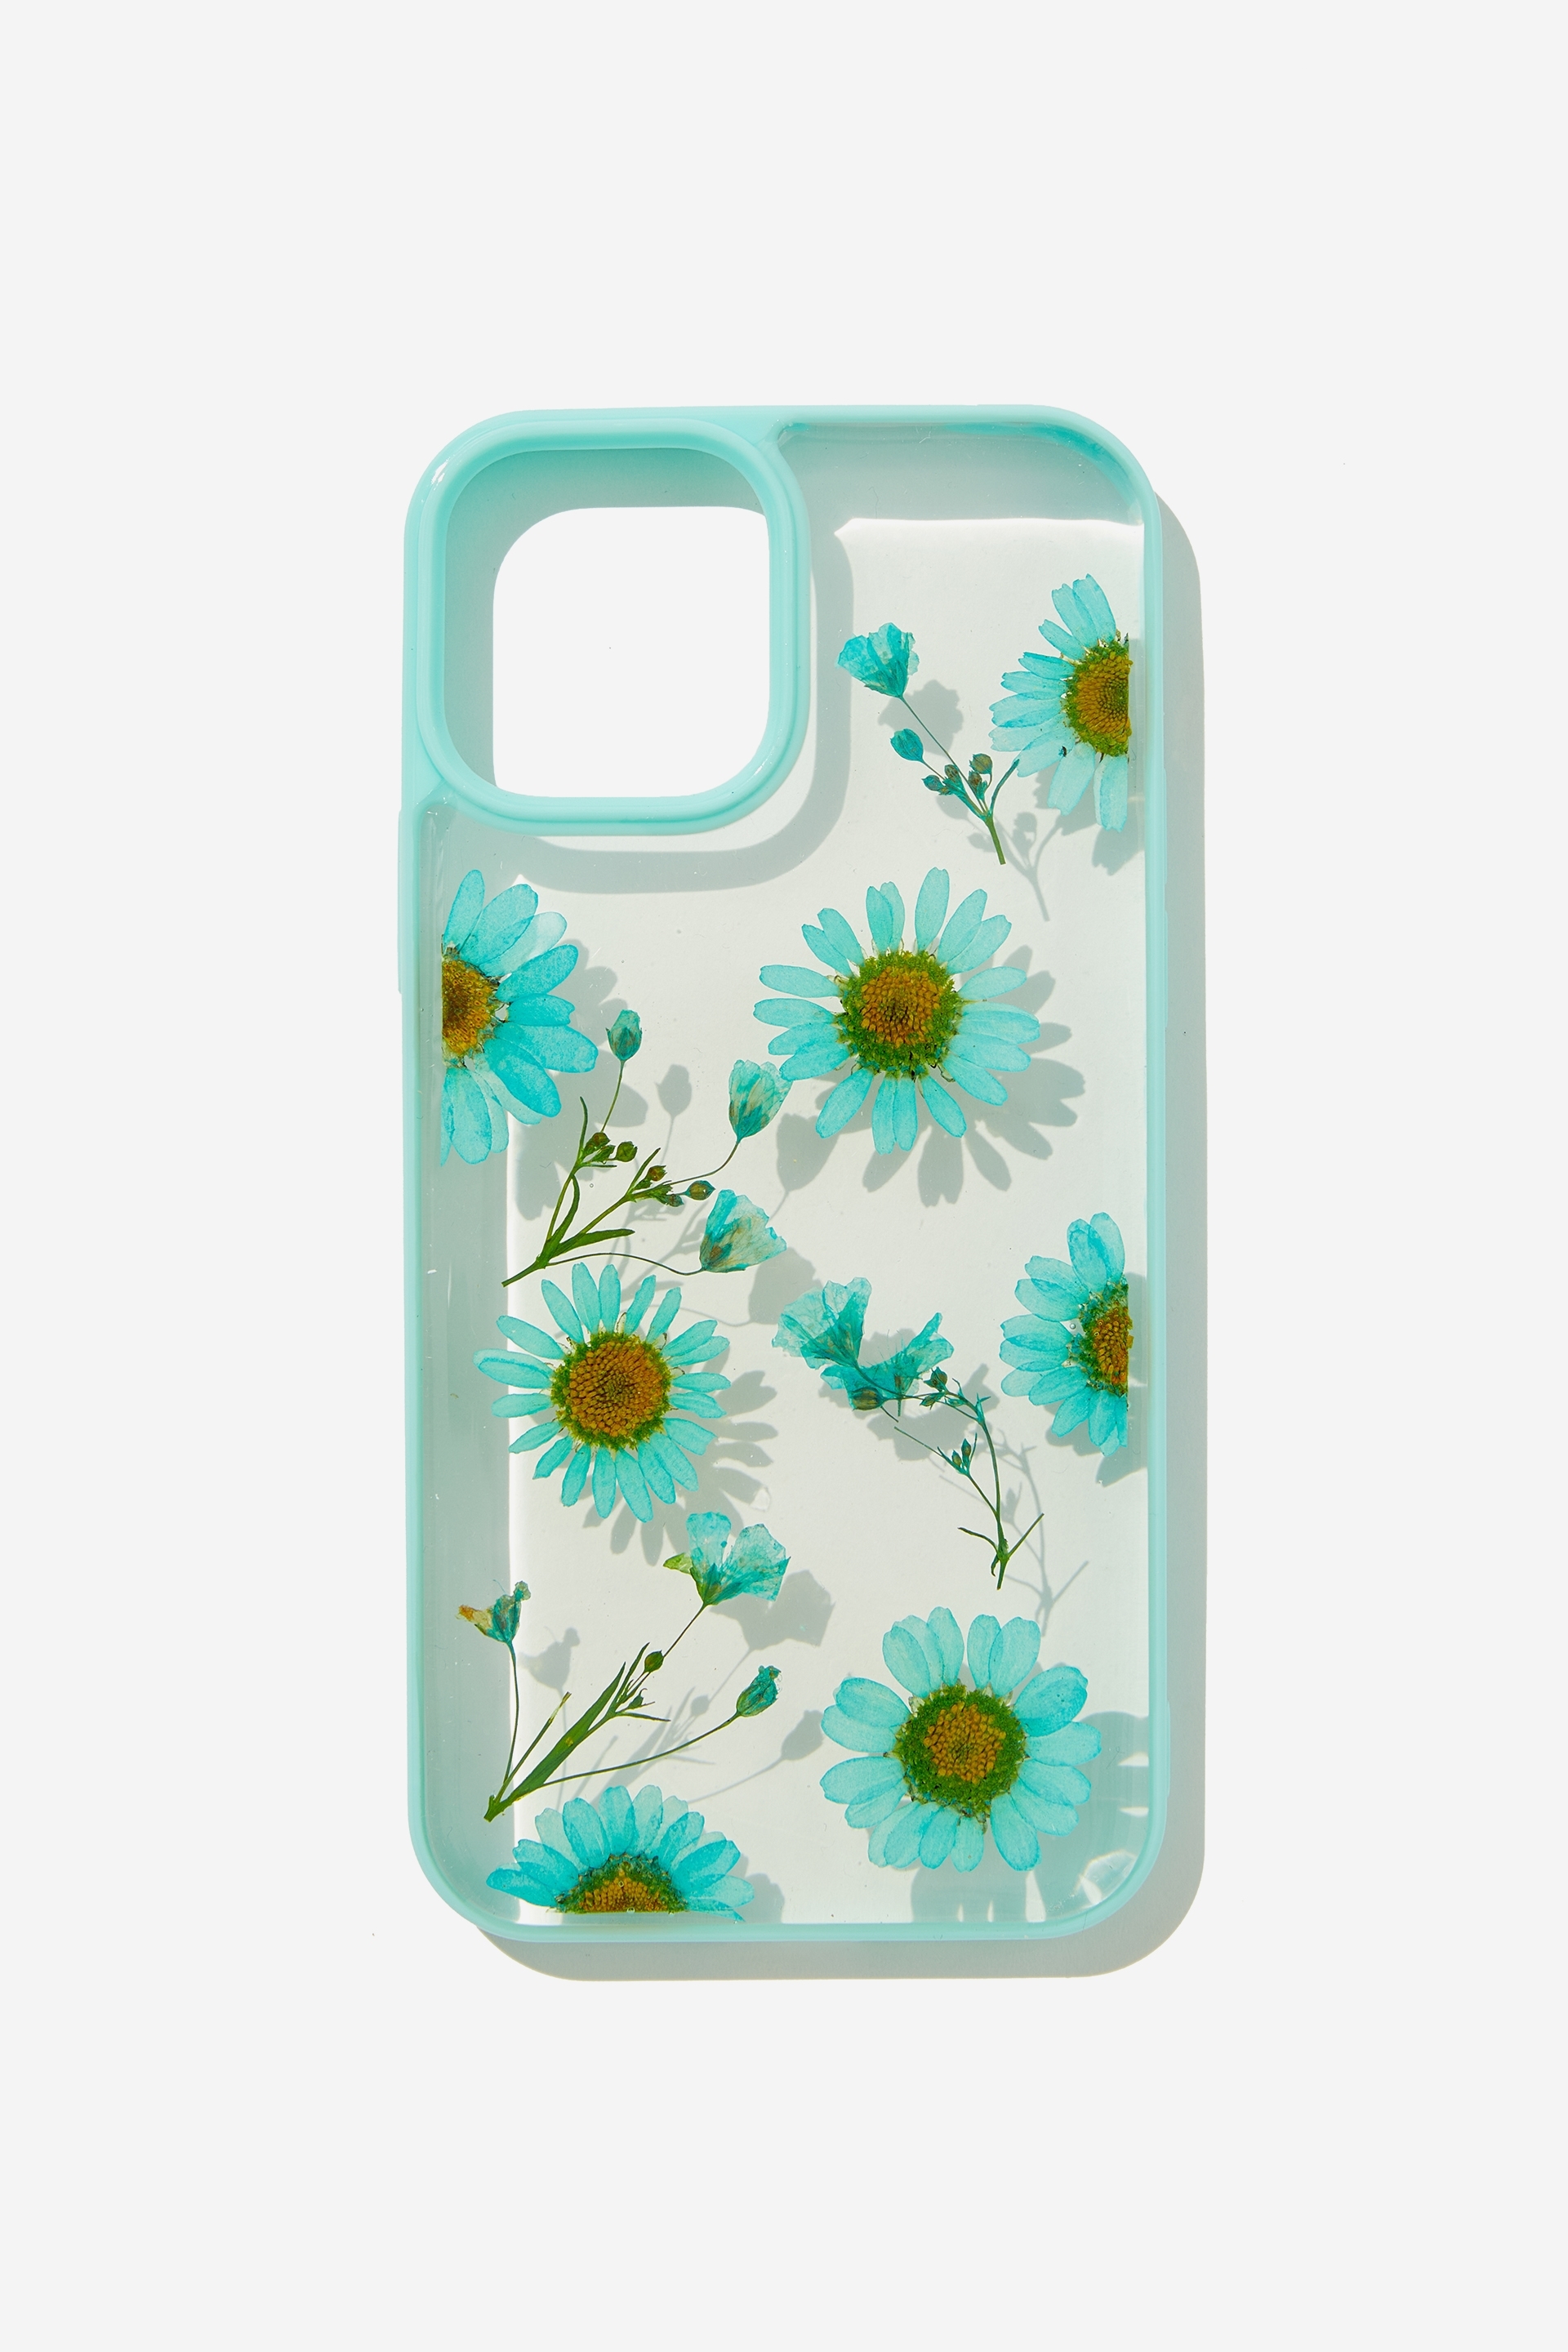 Typo - Protective Phone Case Iphone 12, 12 Pro - Trapped blue daisy / blue